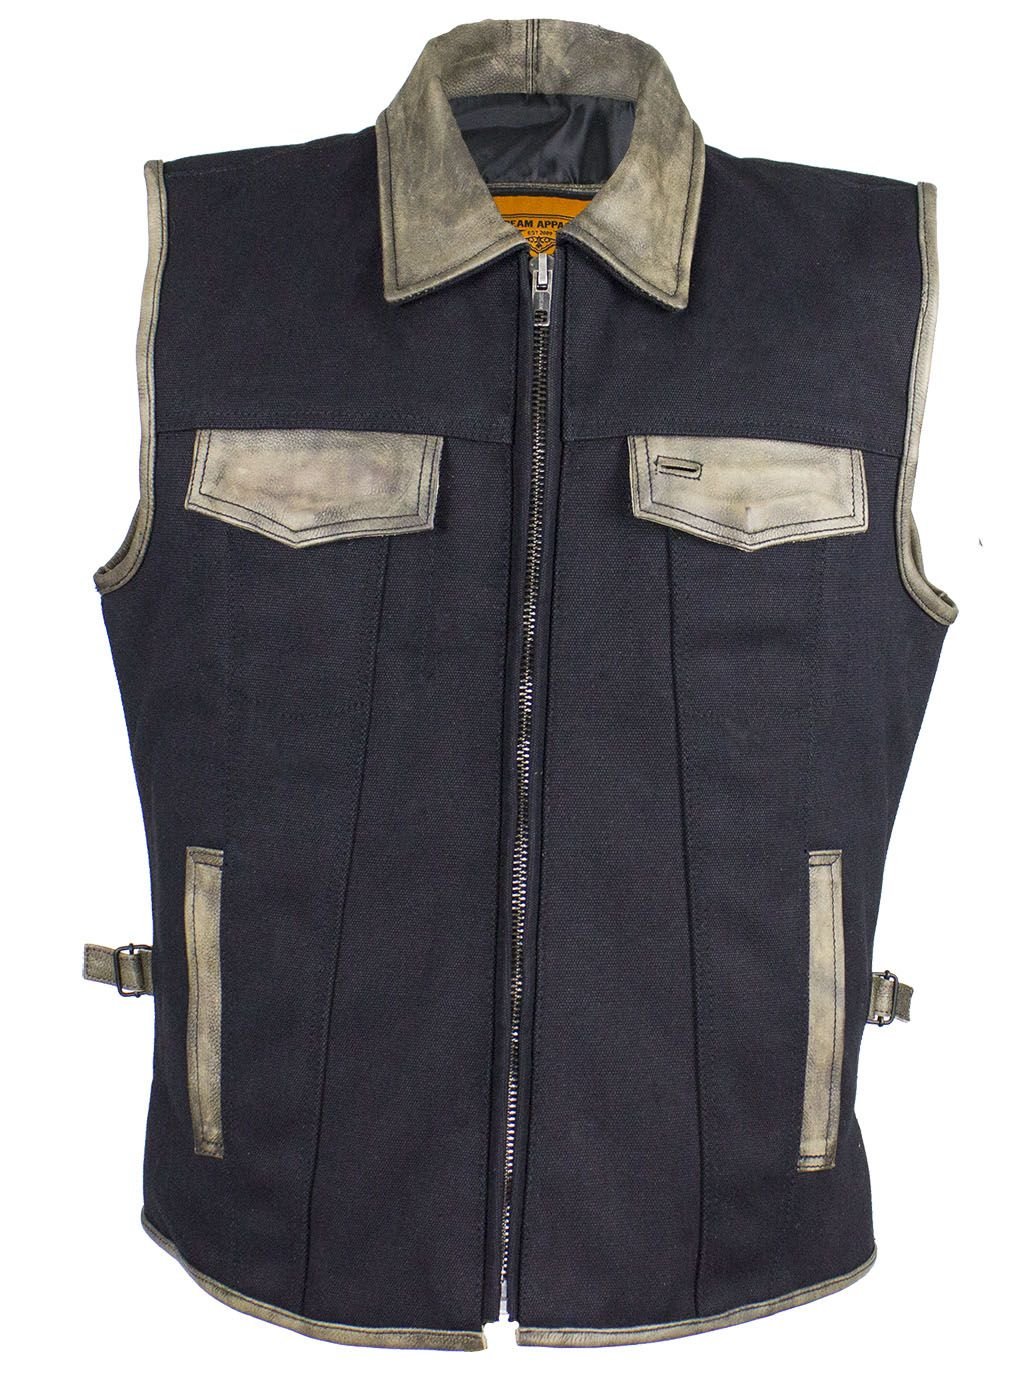 Canvas and Leather Motorcycle Vest - Men's - Distressed Brown - MV8010-CV12-DL